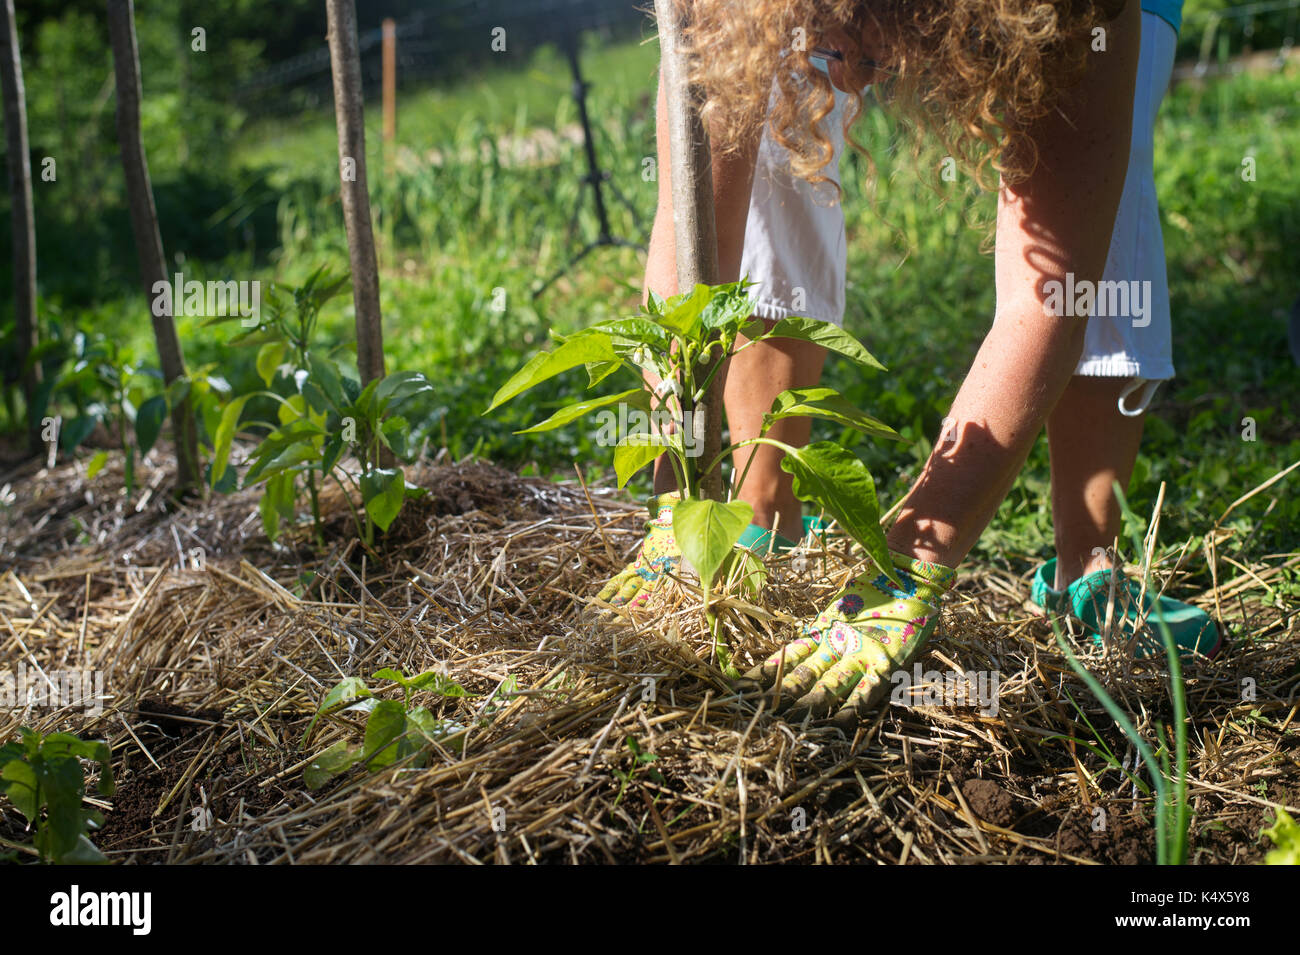 Covering young capsicum plants with straw mulch to protect from drying out quickly ant to control weed in the garden. Using mulch for weed control, wa Stock Photo